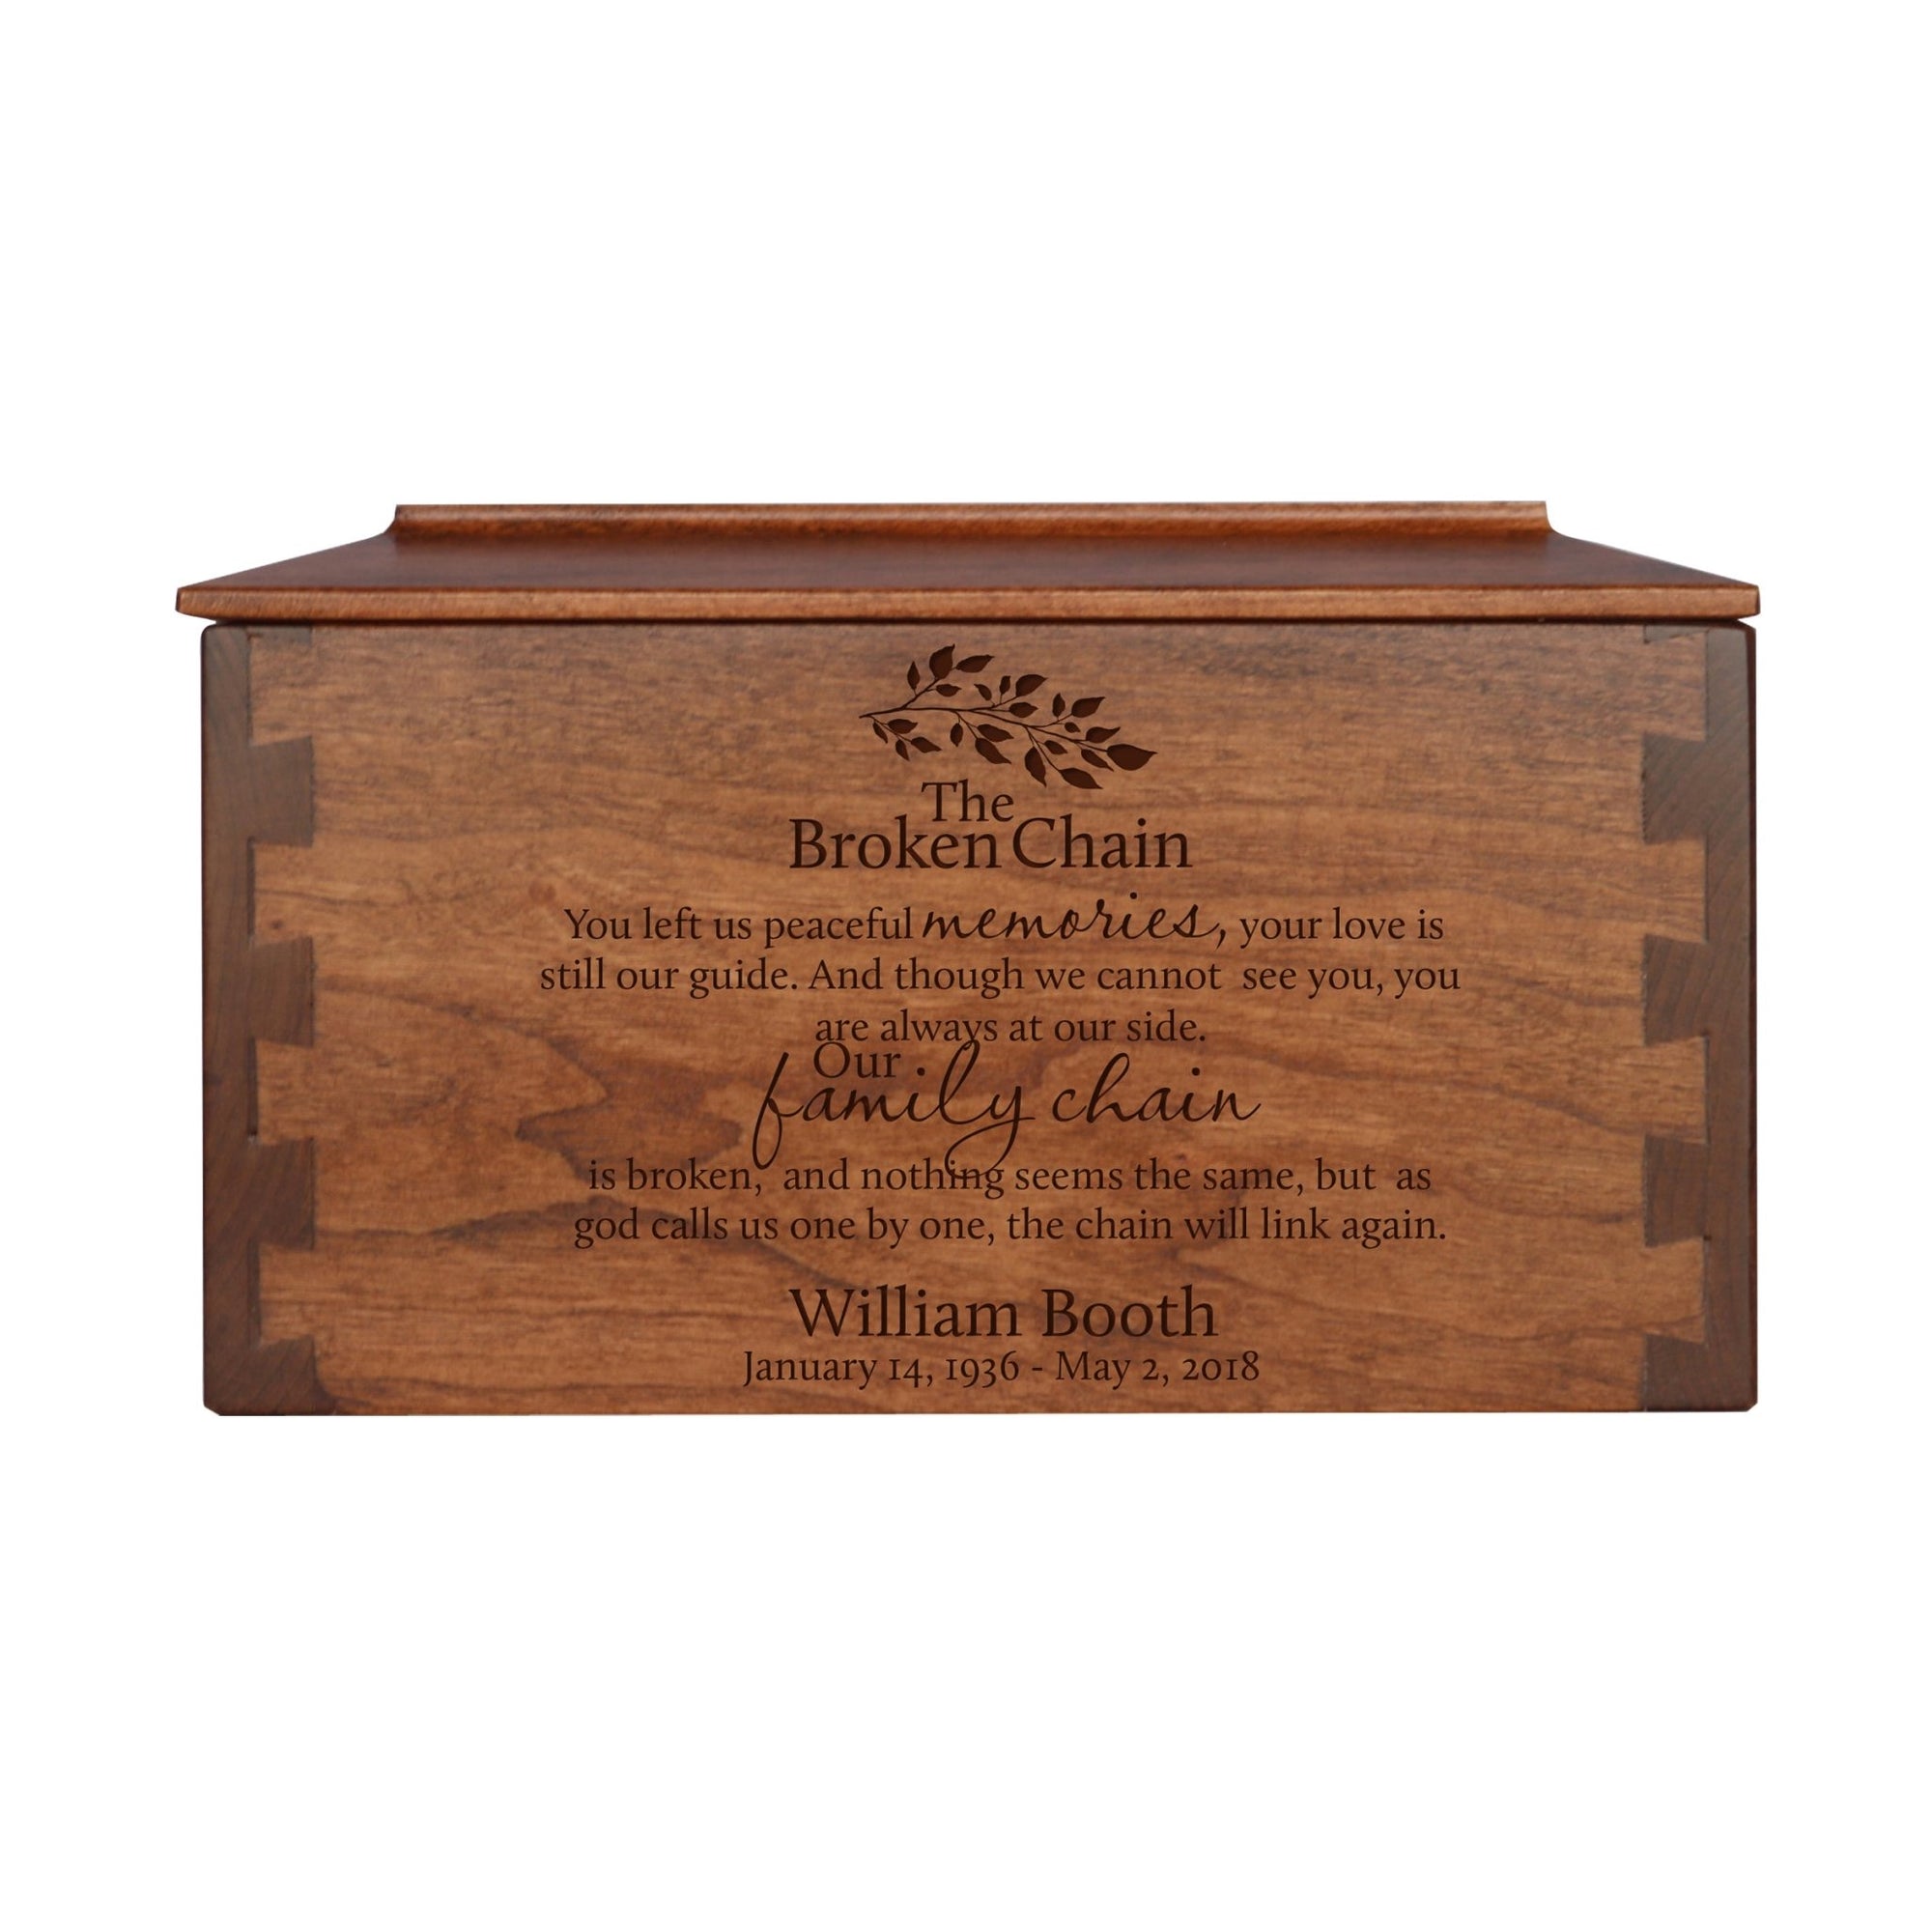 Custom Wooden Cremation Urn Box Medium for Human Ashes holds 146 cu in The Broken Chain 2 - LifeSong Milestones